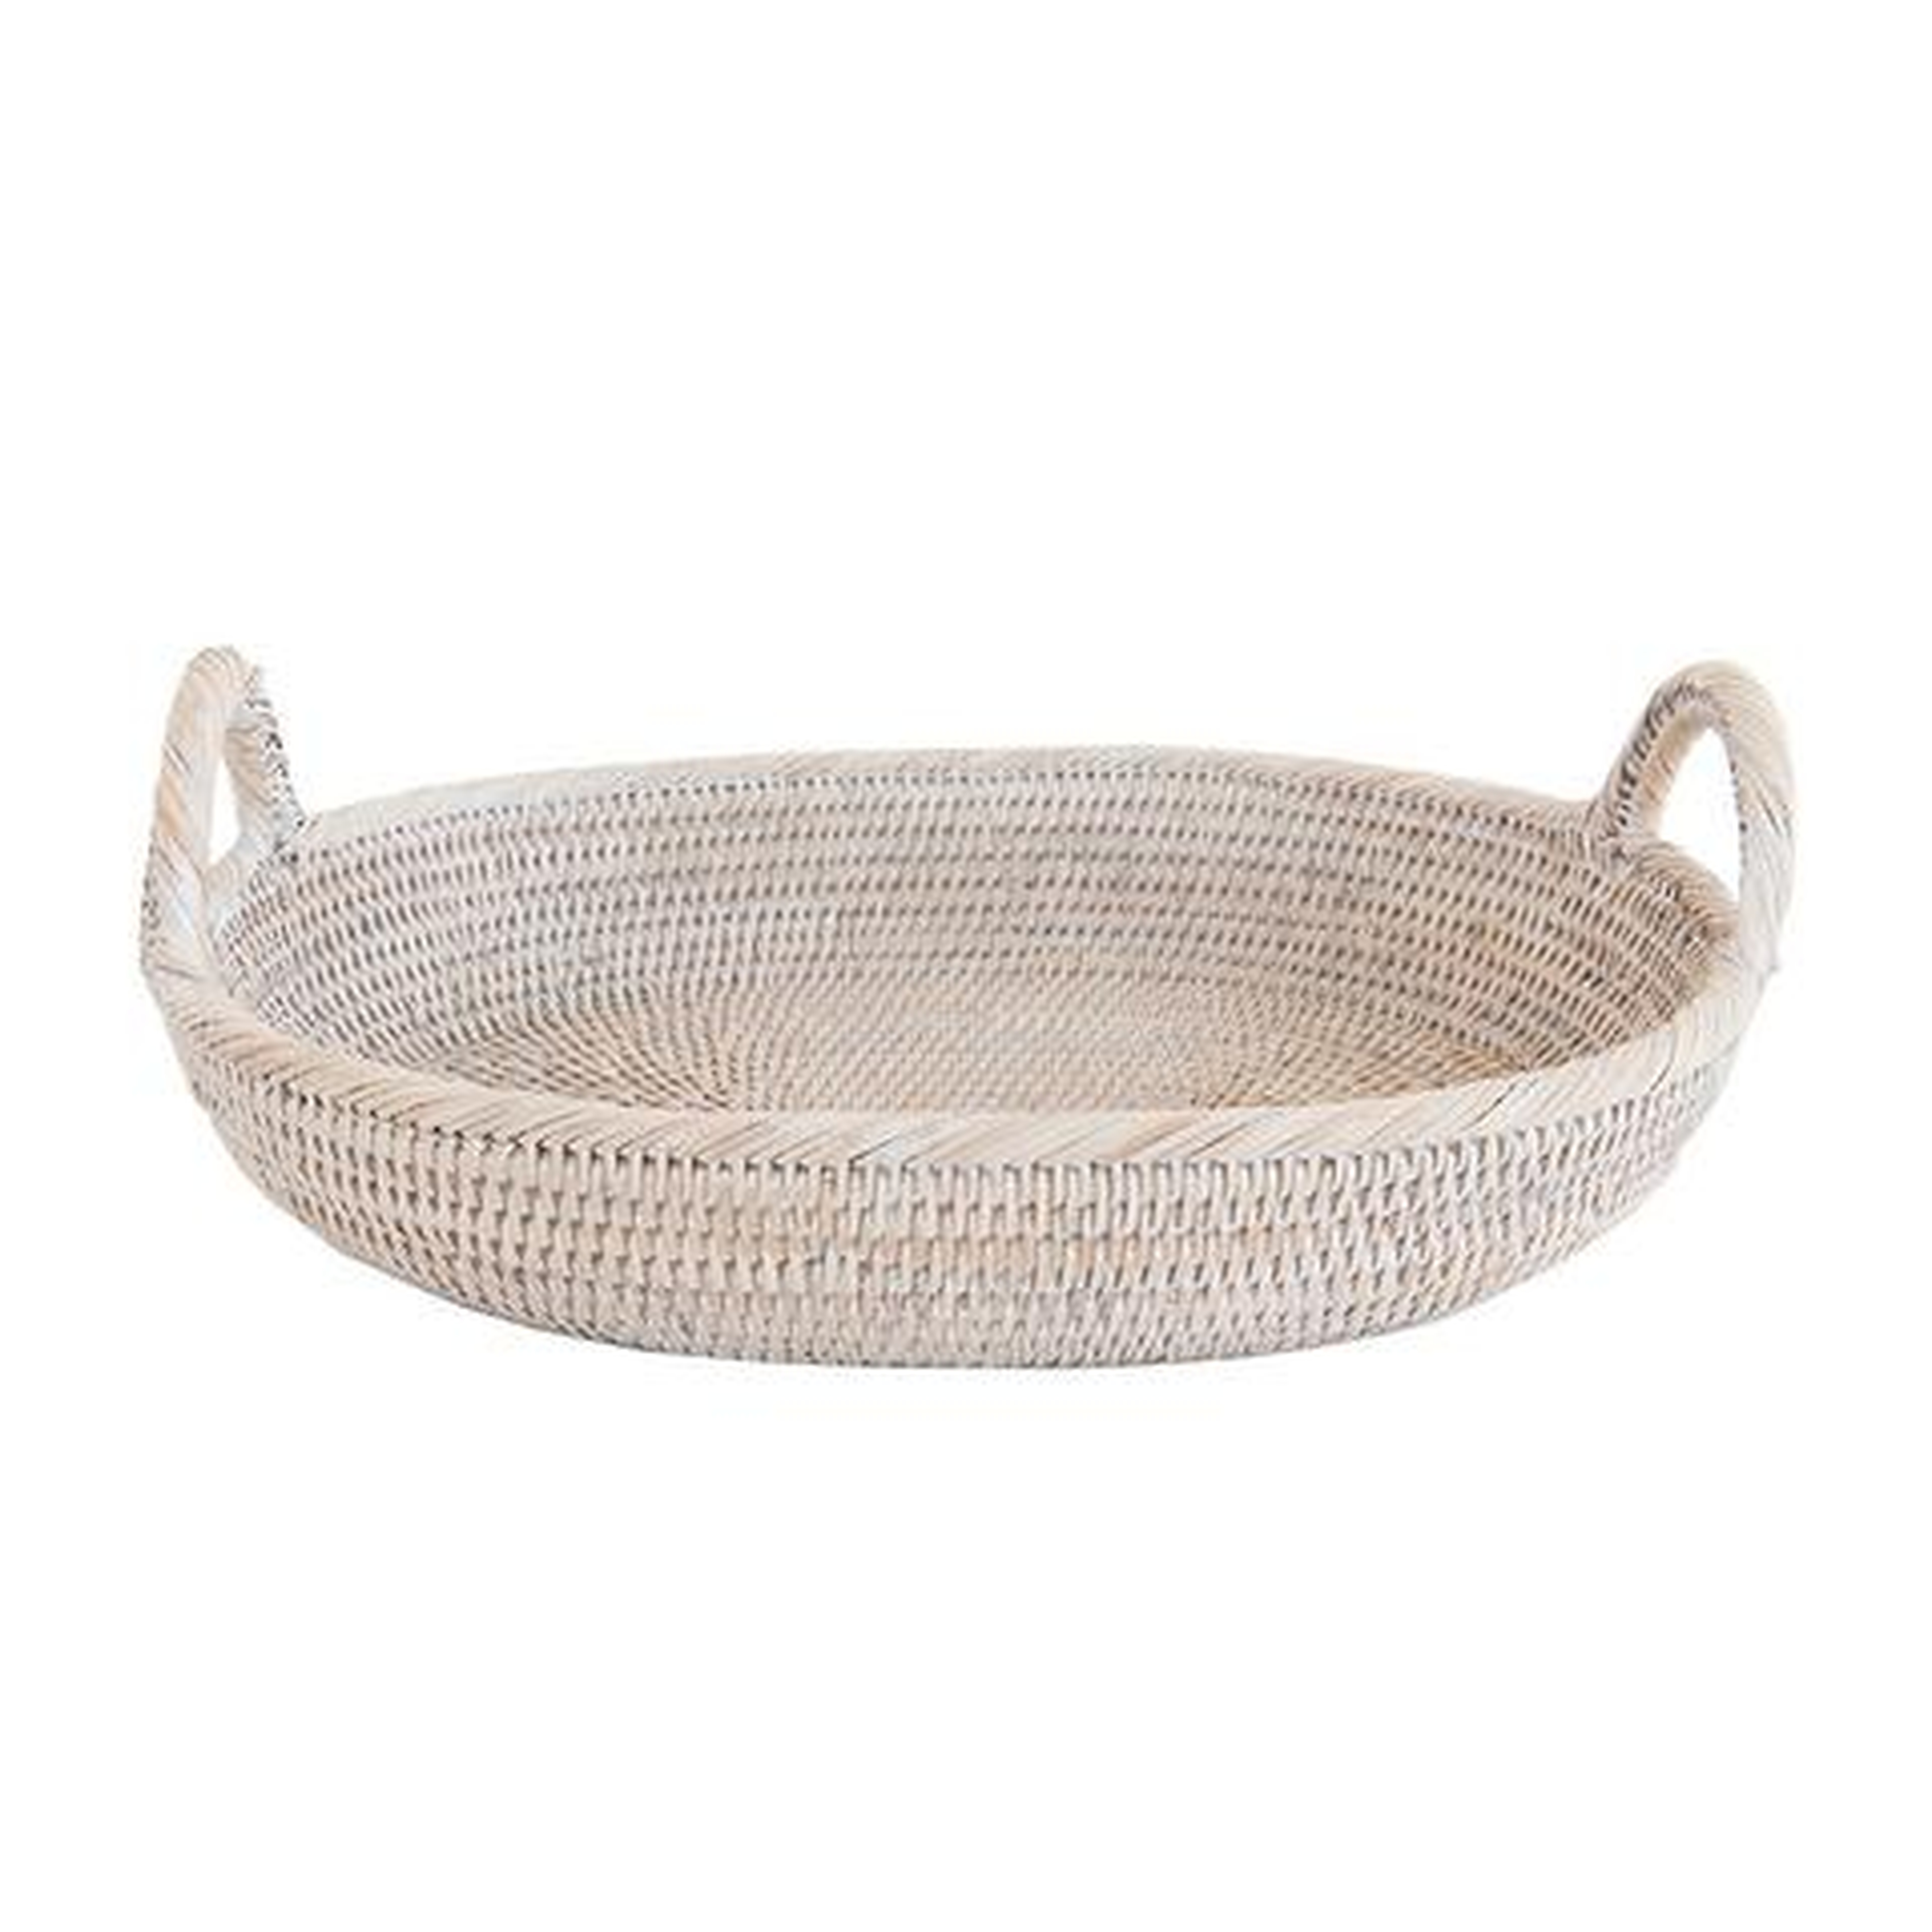 OVAL LIGHT RATTAN TRAY - McGee & Co.